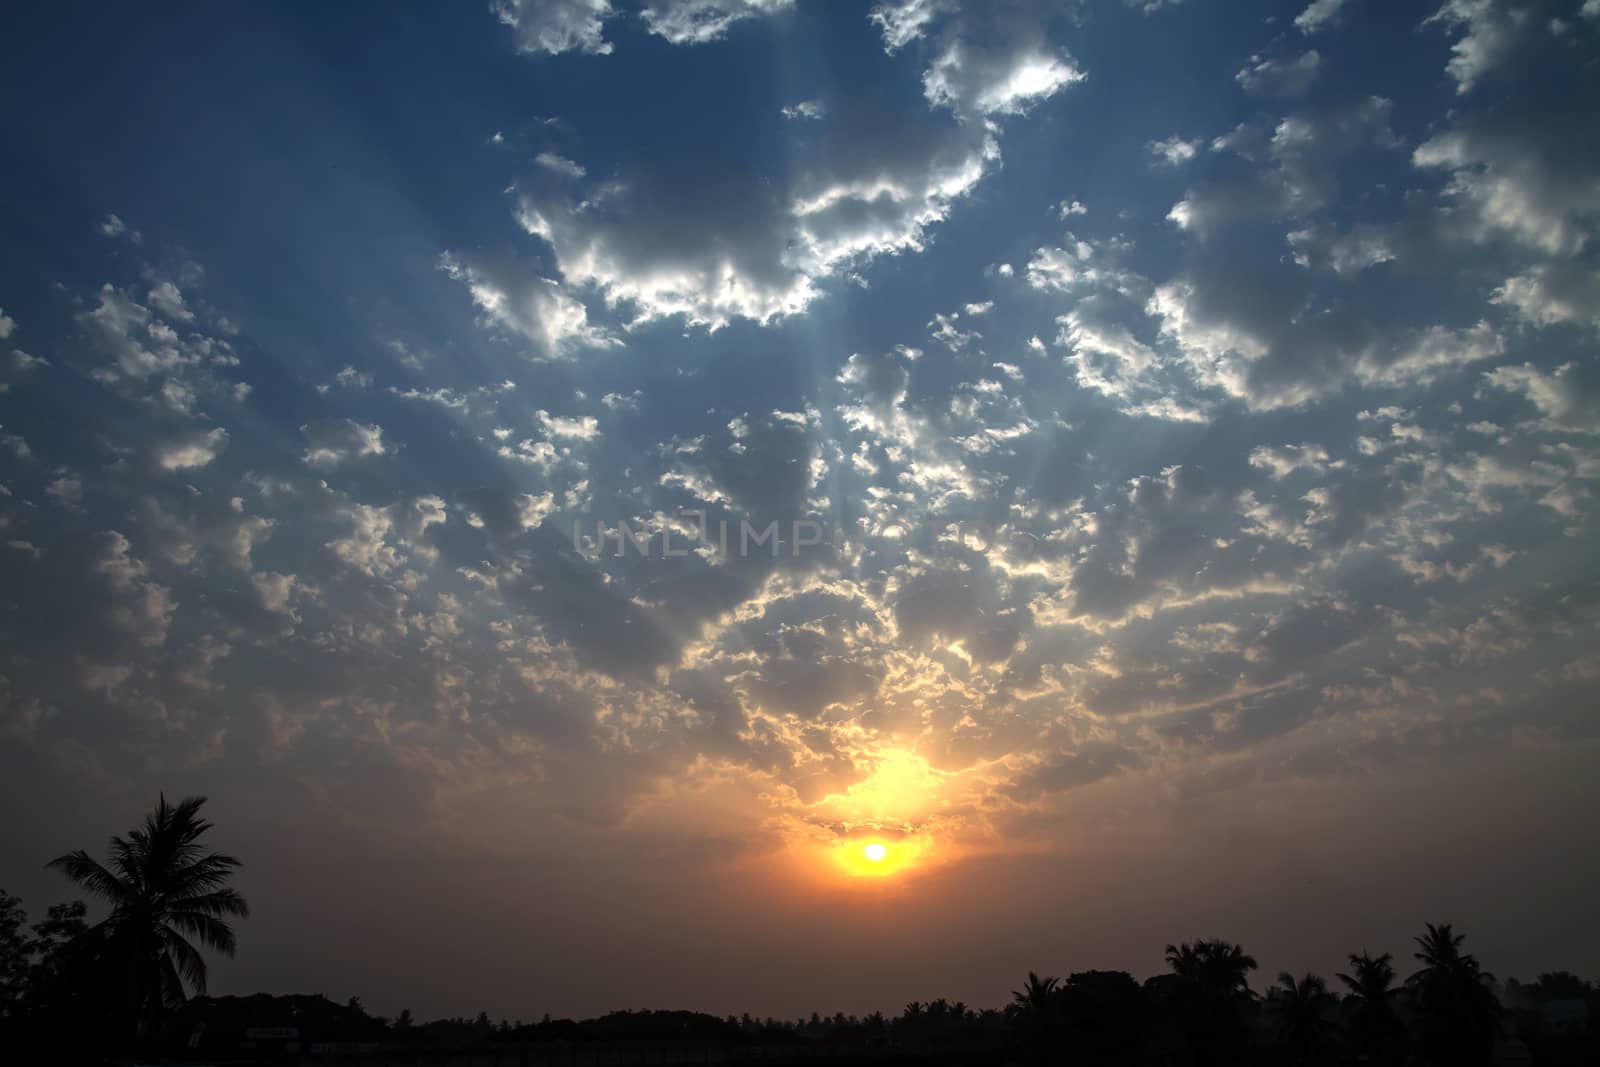 Dramatic Dawn Sun Skyscape Edge Lighted Cumulus Clouds by giddavr